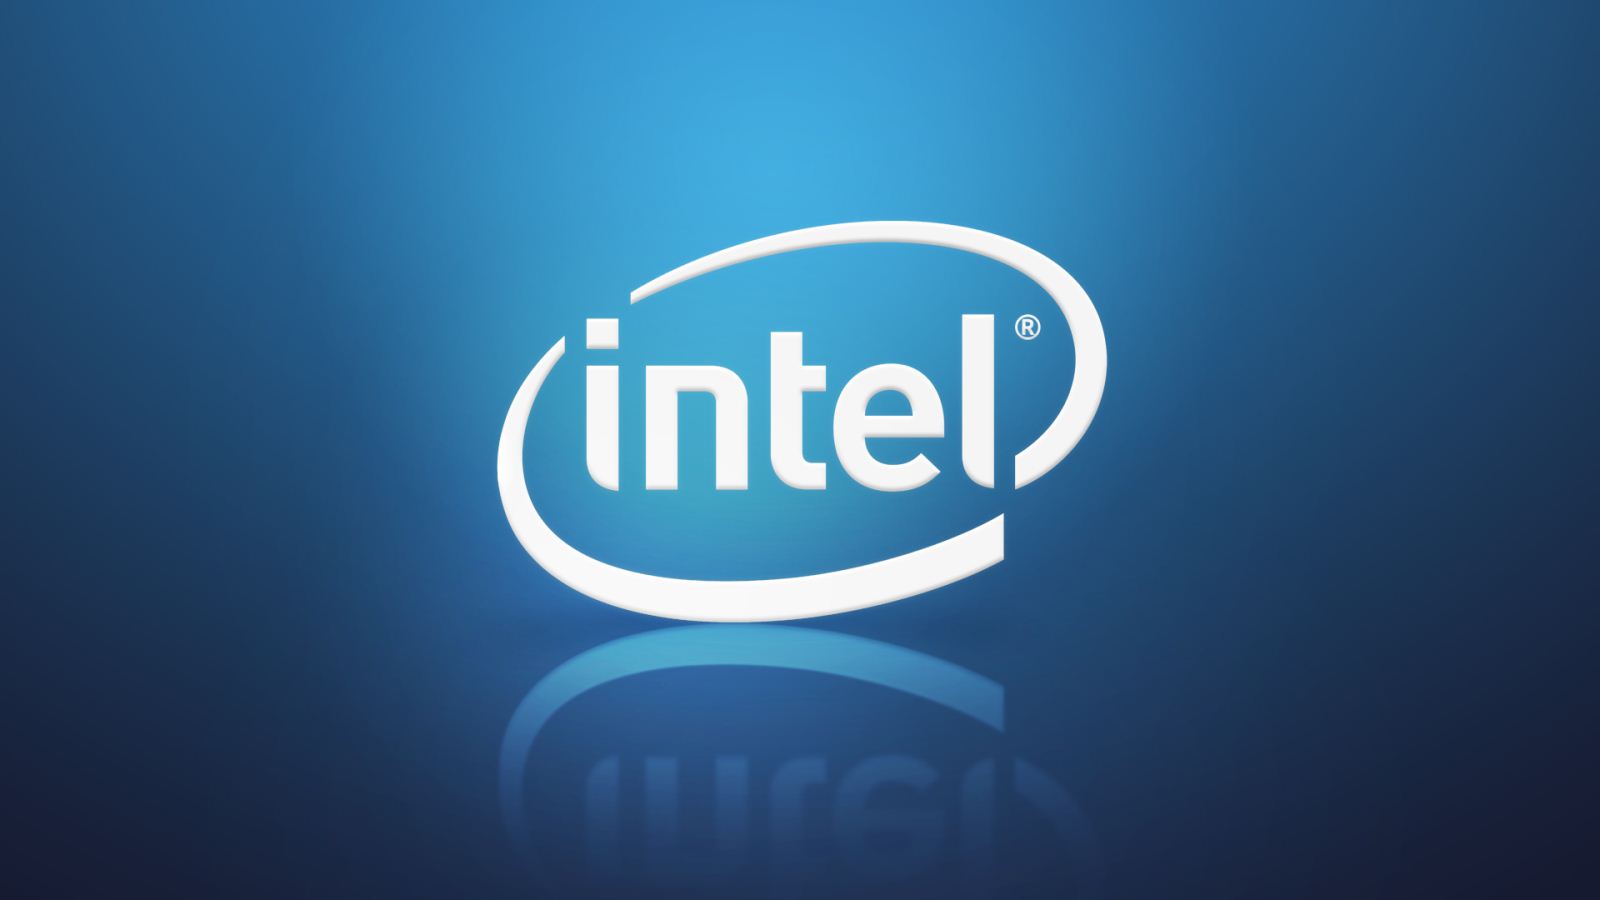 Intel Officially Launches Haswell Processors Ahead Of Mac Refresh